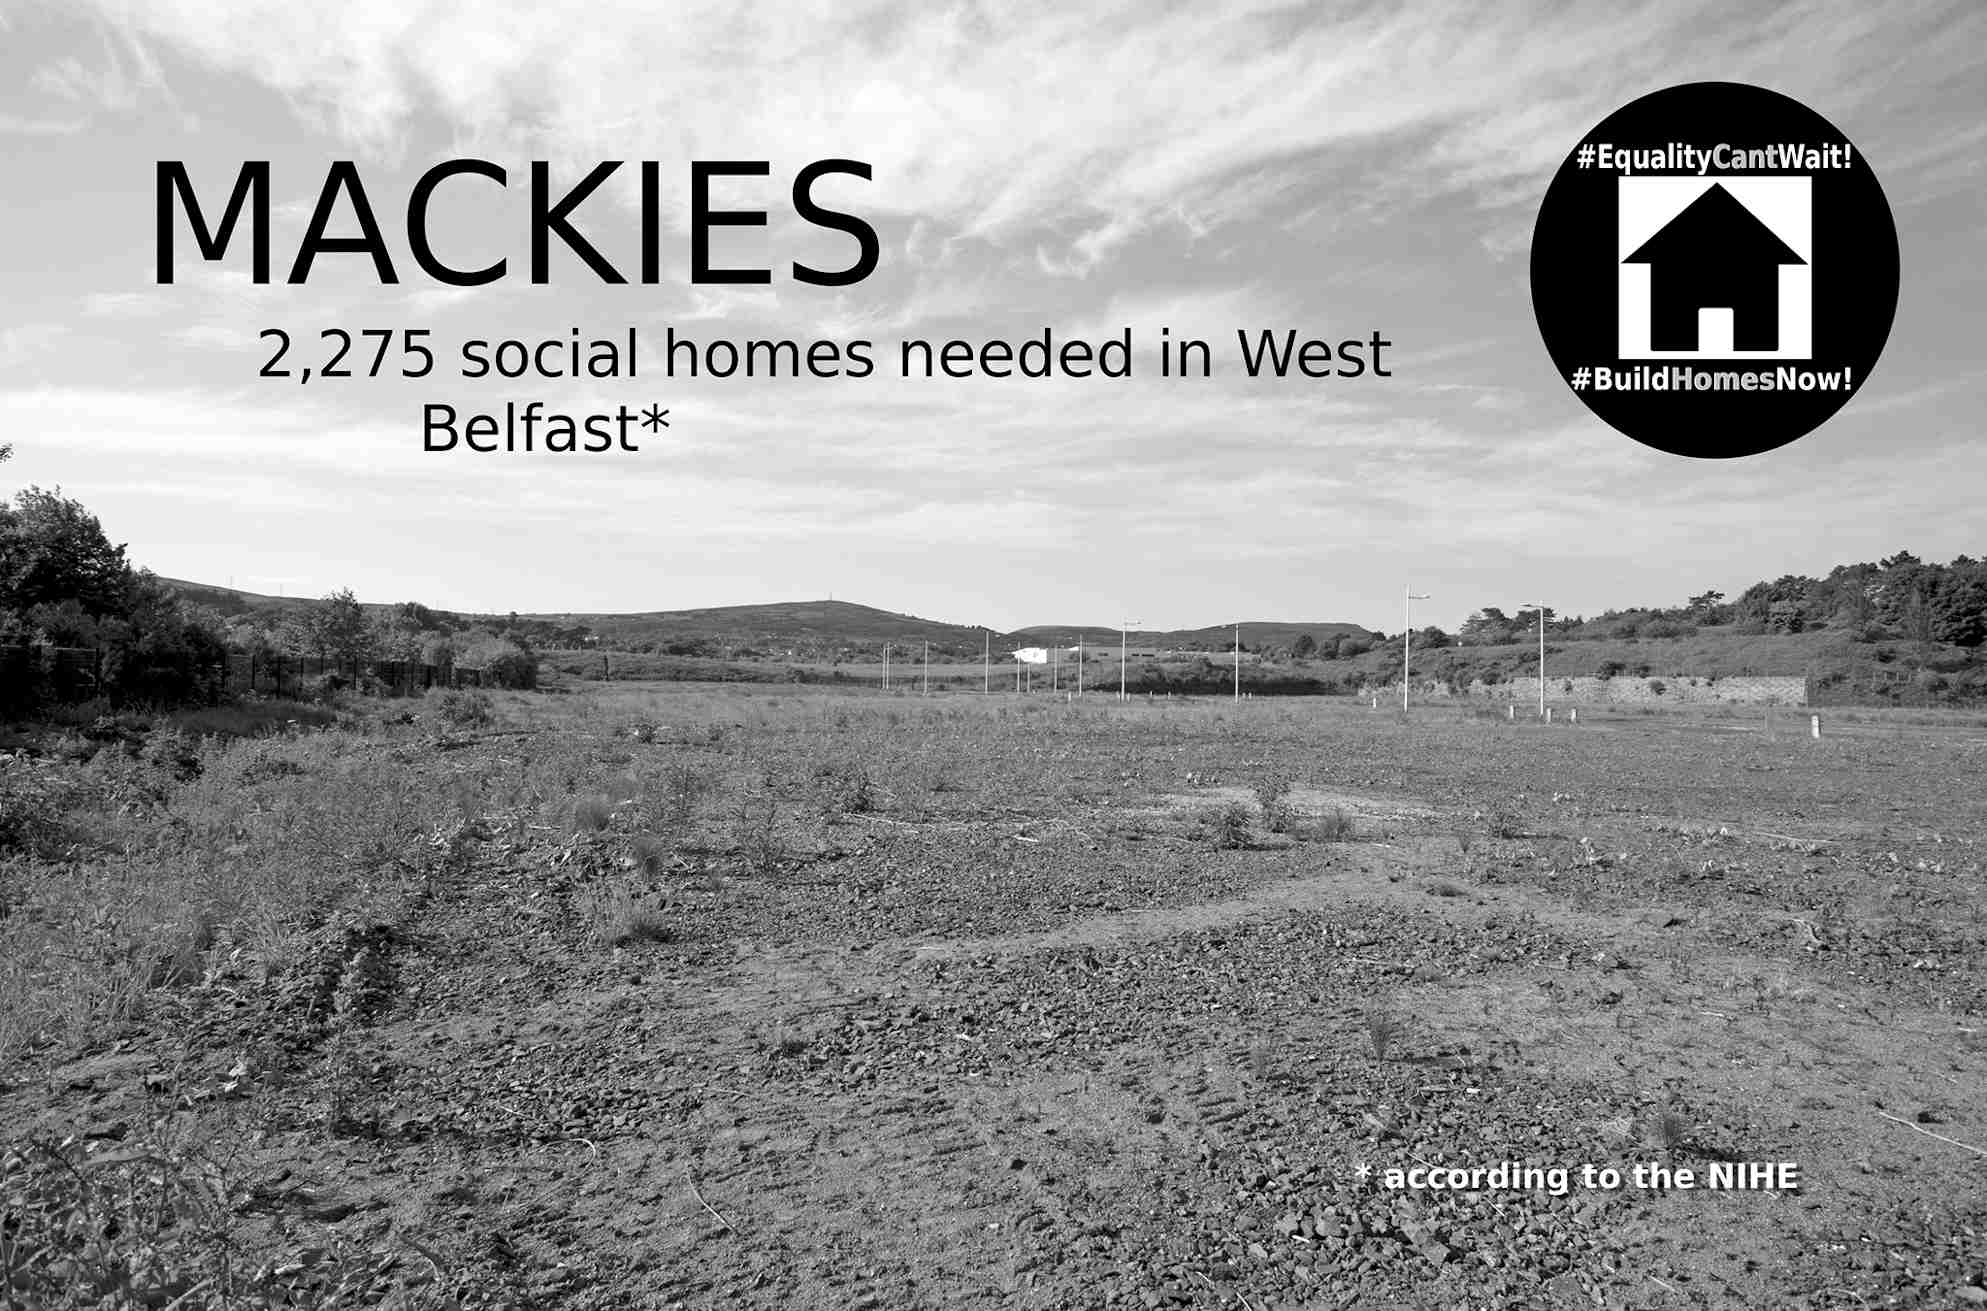 Plans to transfer ownership of the Mackies site to Belfast City Council from the Department for Communities are at an advanced stage